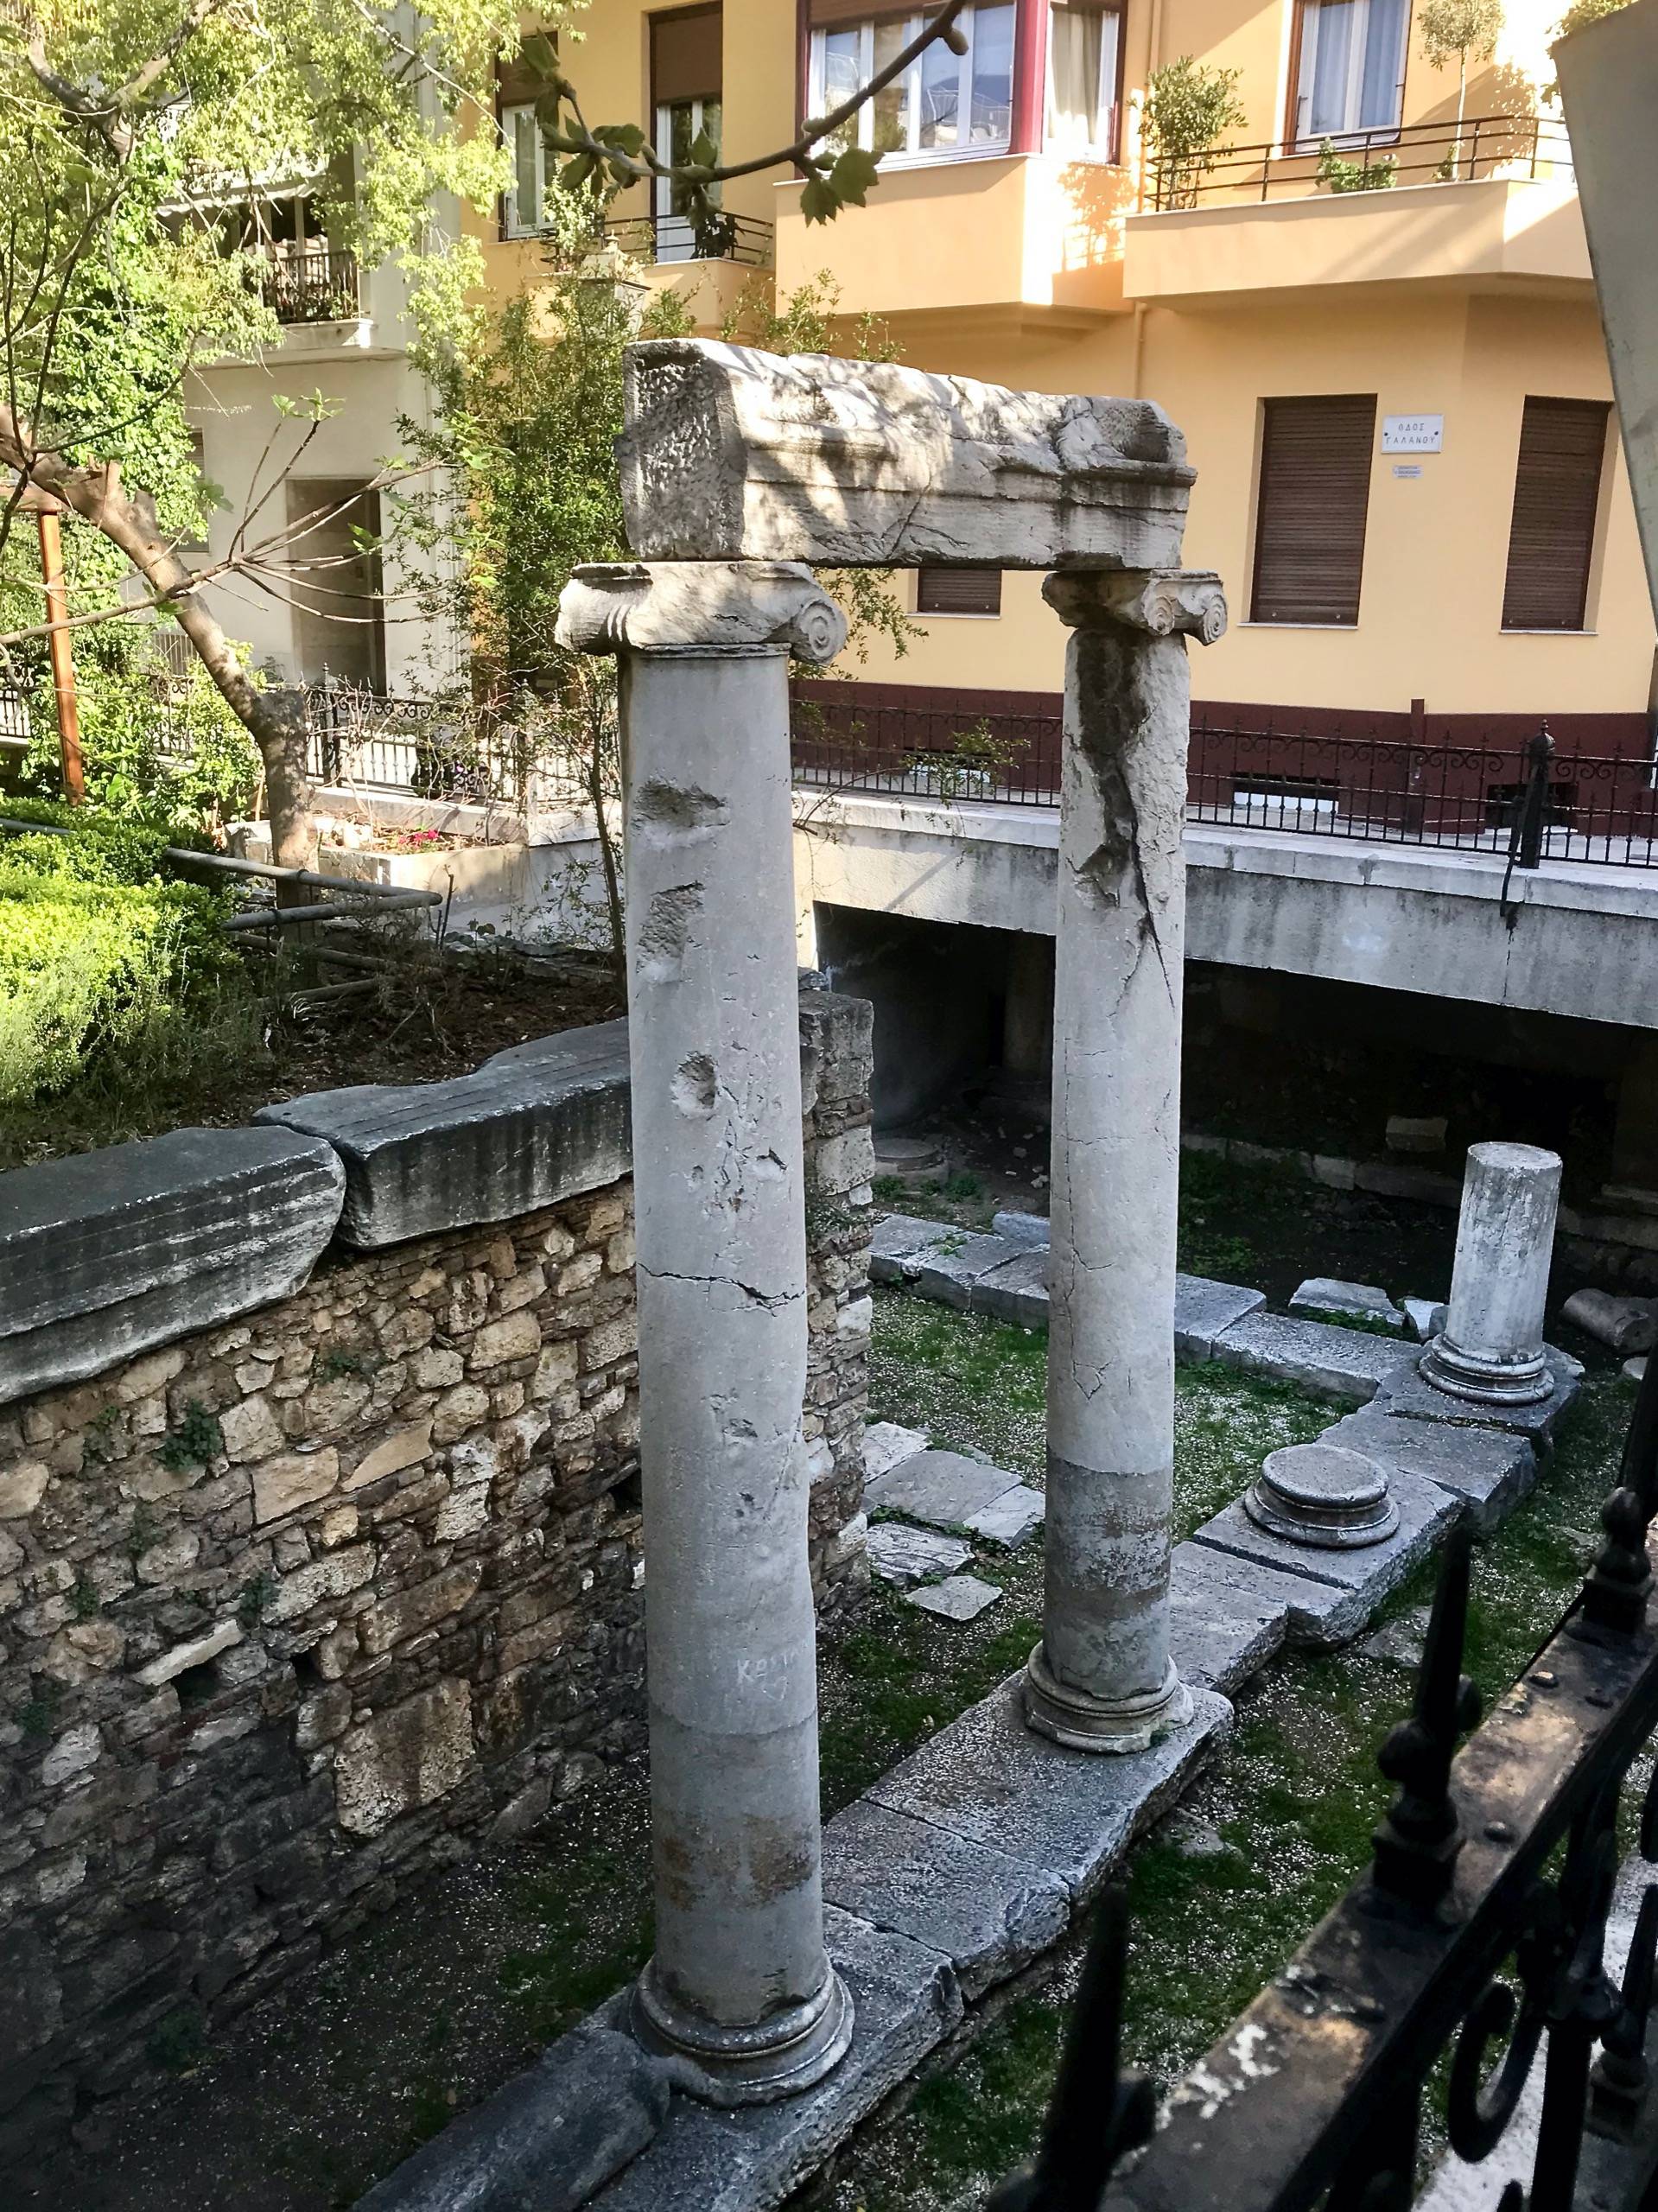 Travels in Greece: Plaka Marketplace,  Ancient Meets Modern - Athens
